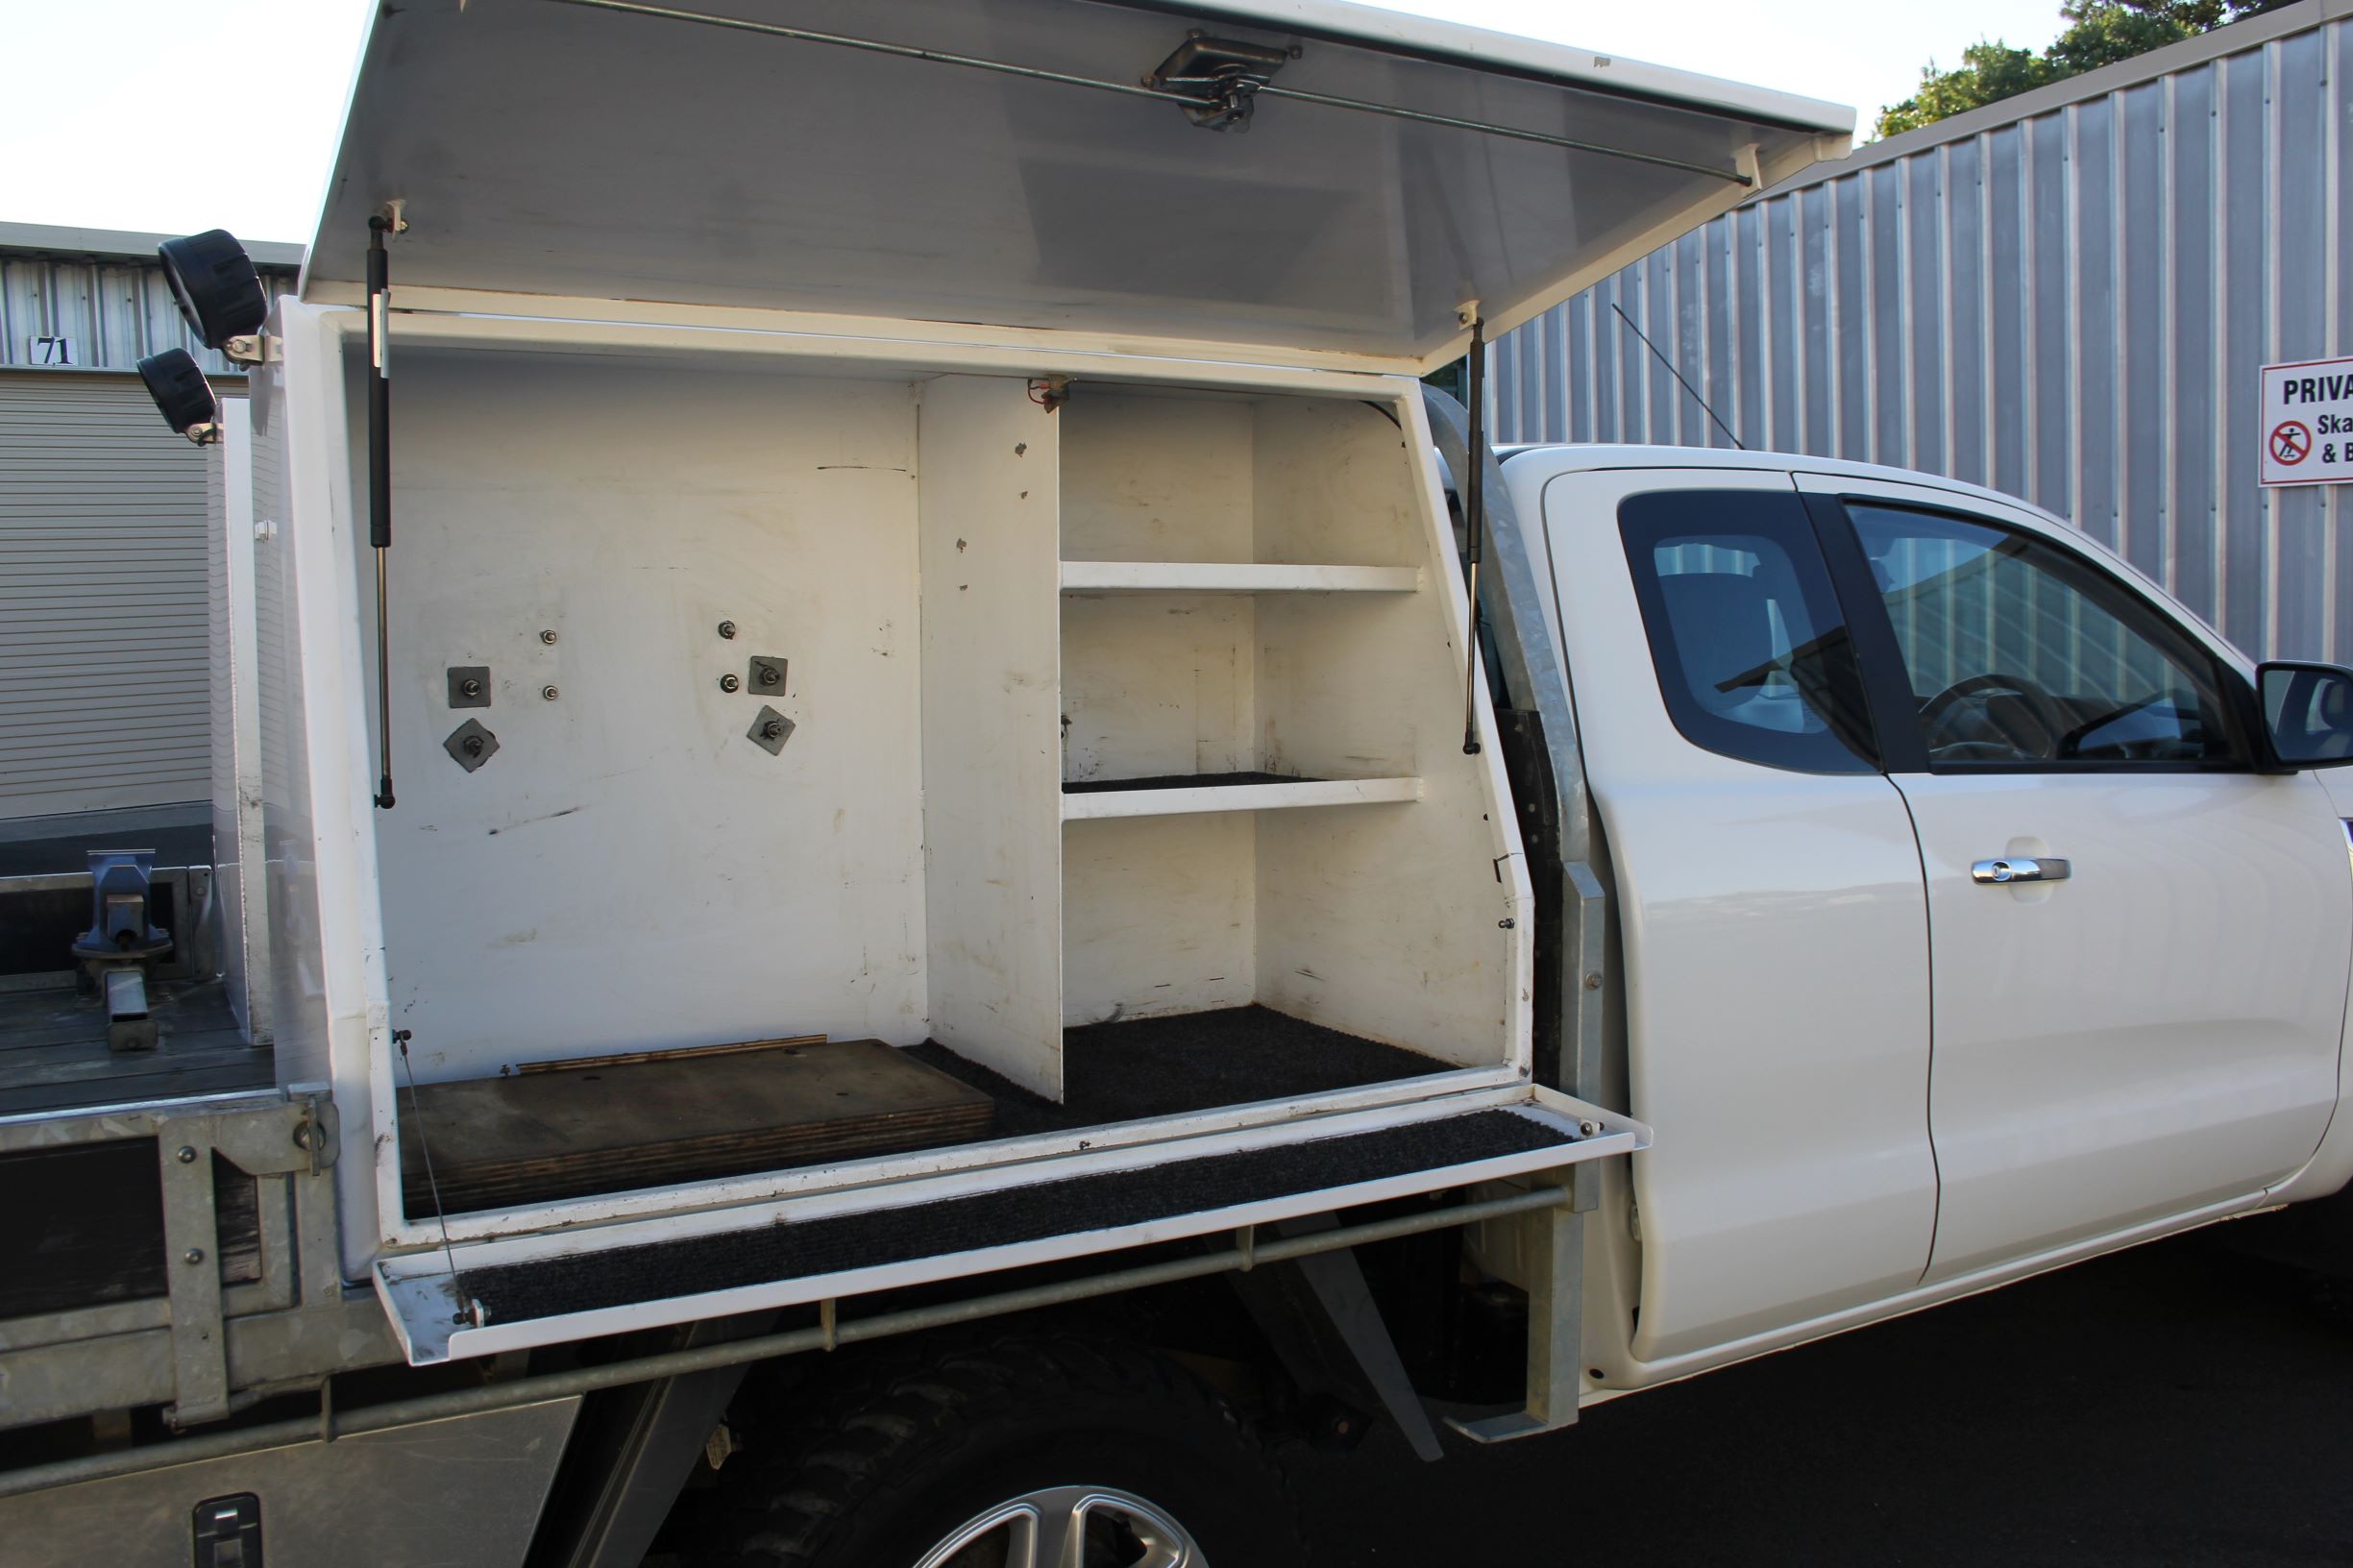 Ford Ranger XLT 2015 for sale in Auckland